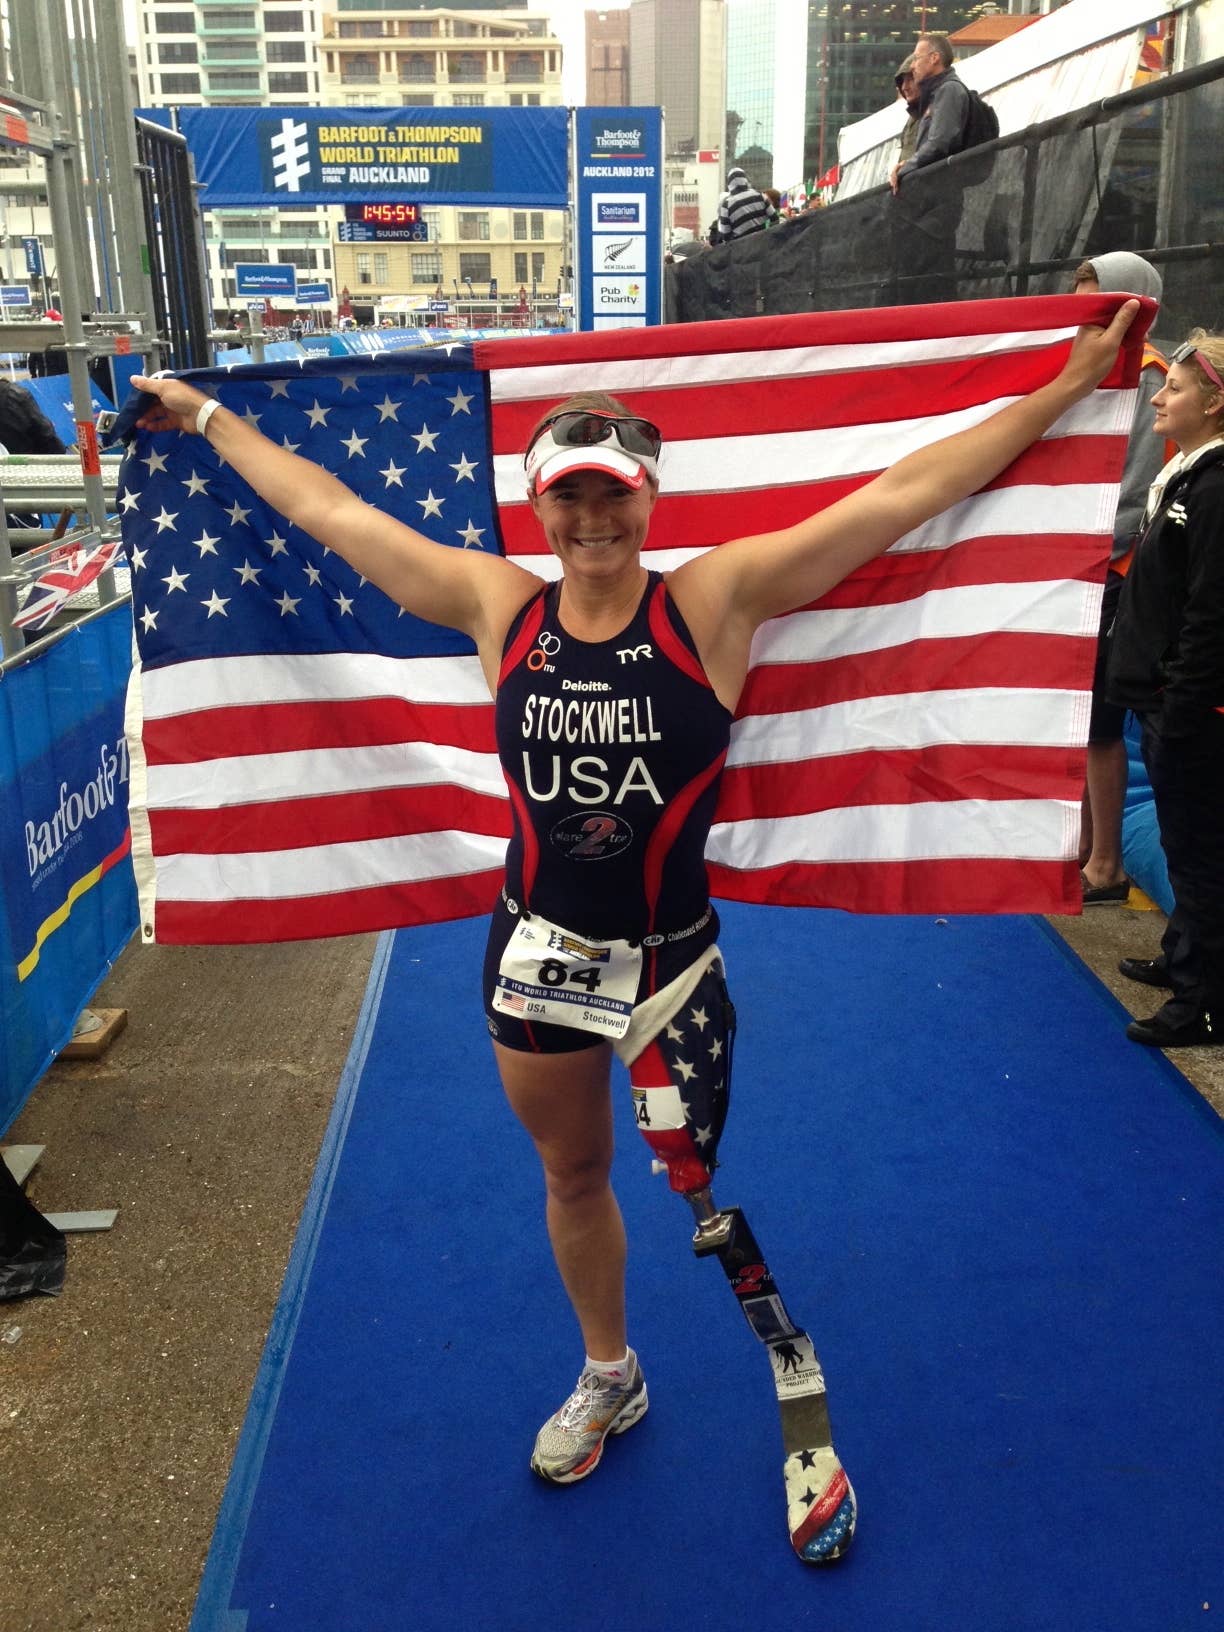 Melissa Stockwell holding an American flag at a triathlon